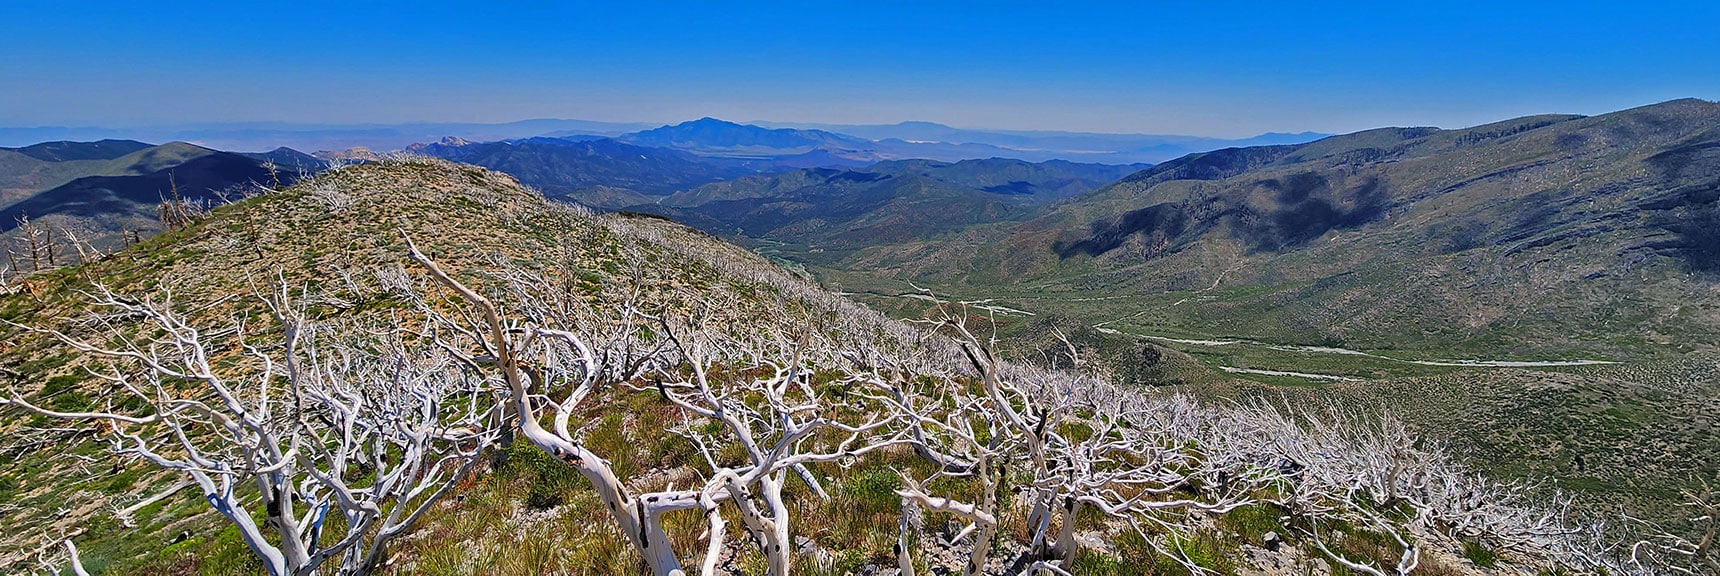 Trees in Burn Area Have Wirey Branched at This Altitude vs. Brittle At Lower Altitudes. | Wilson Ridge to Harris Mountain | Lovell Canyon, Nevada